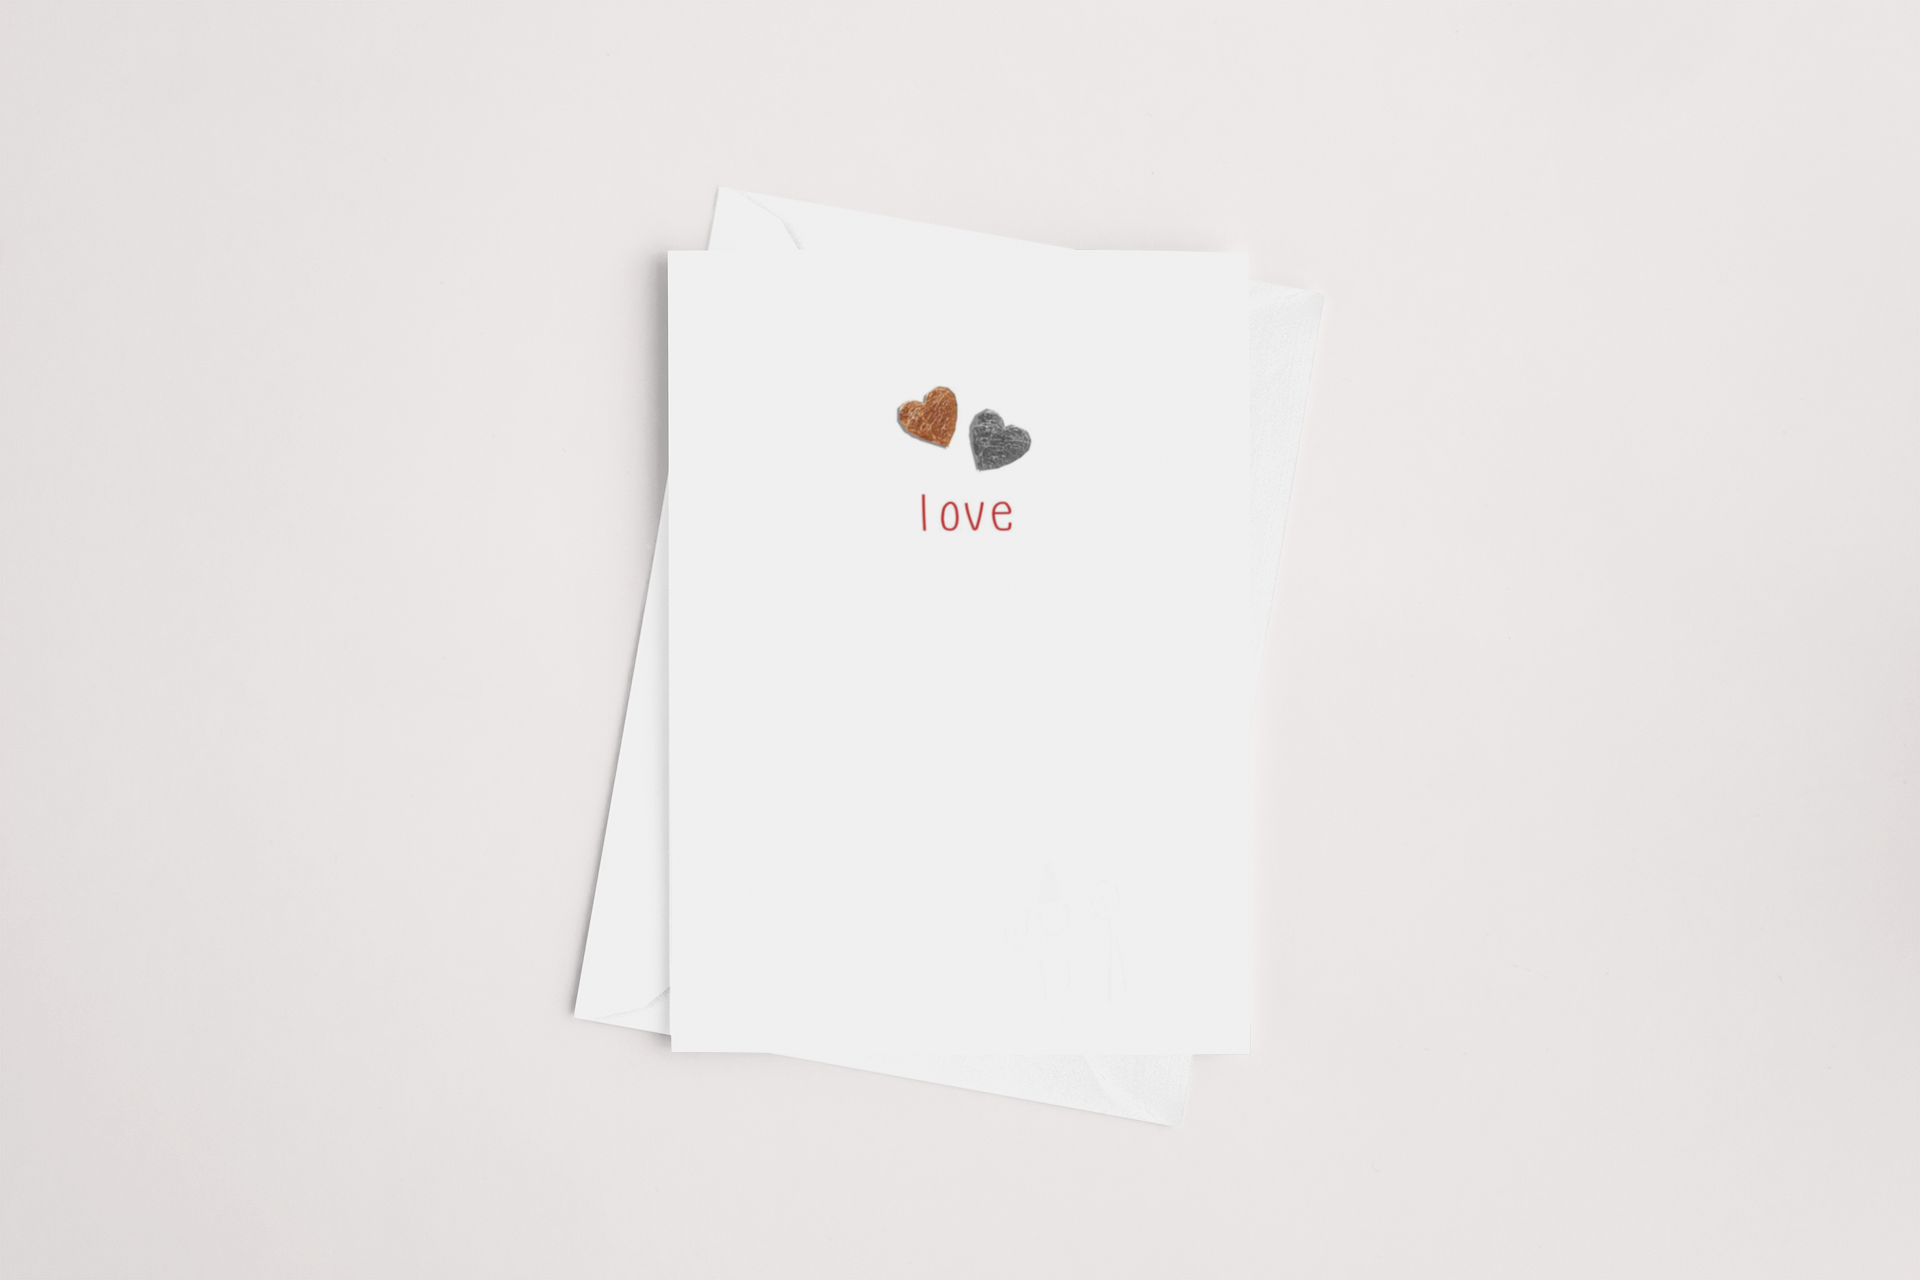 A minimalist icandy Love Card with a simple design featuring the word "love" in lowercase letters, flanked by two small heart-shaped elements on a white background, product of New Zealand.